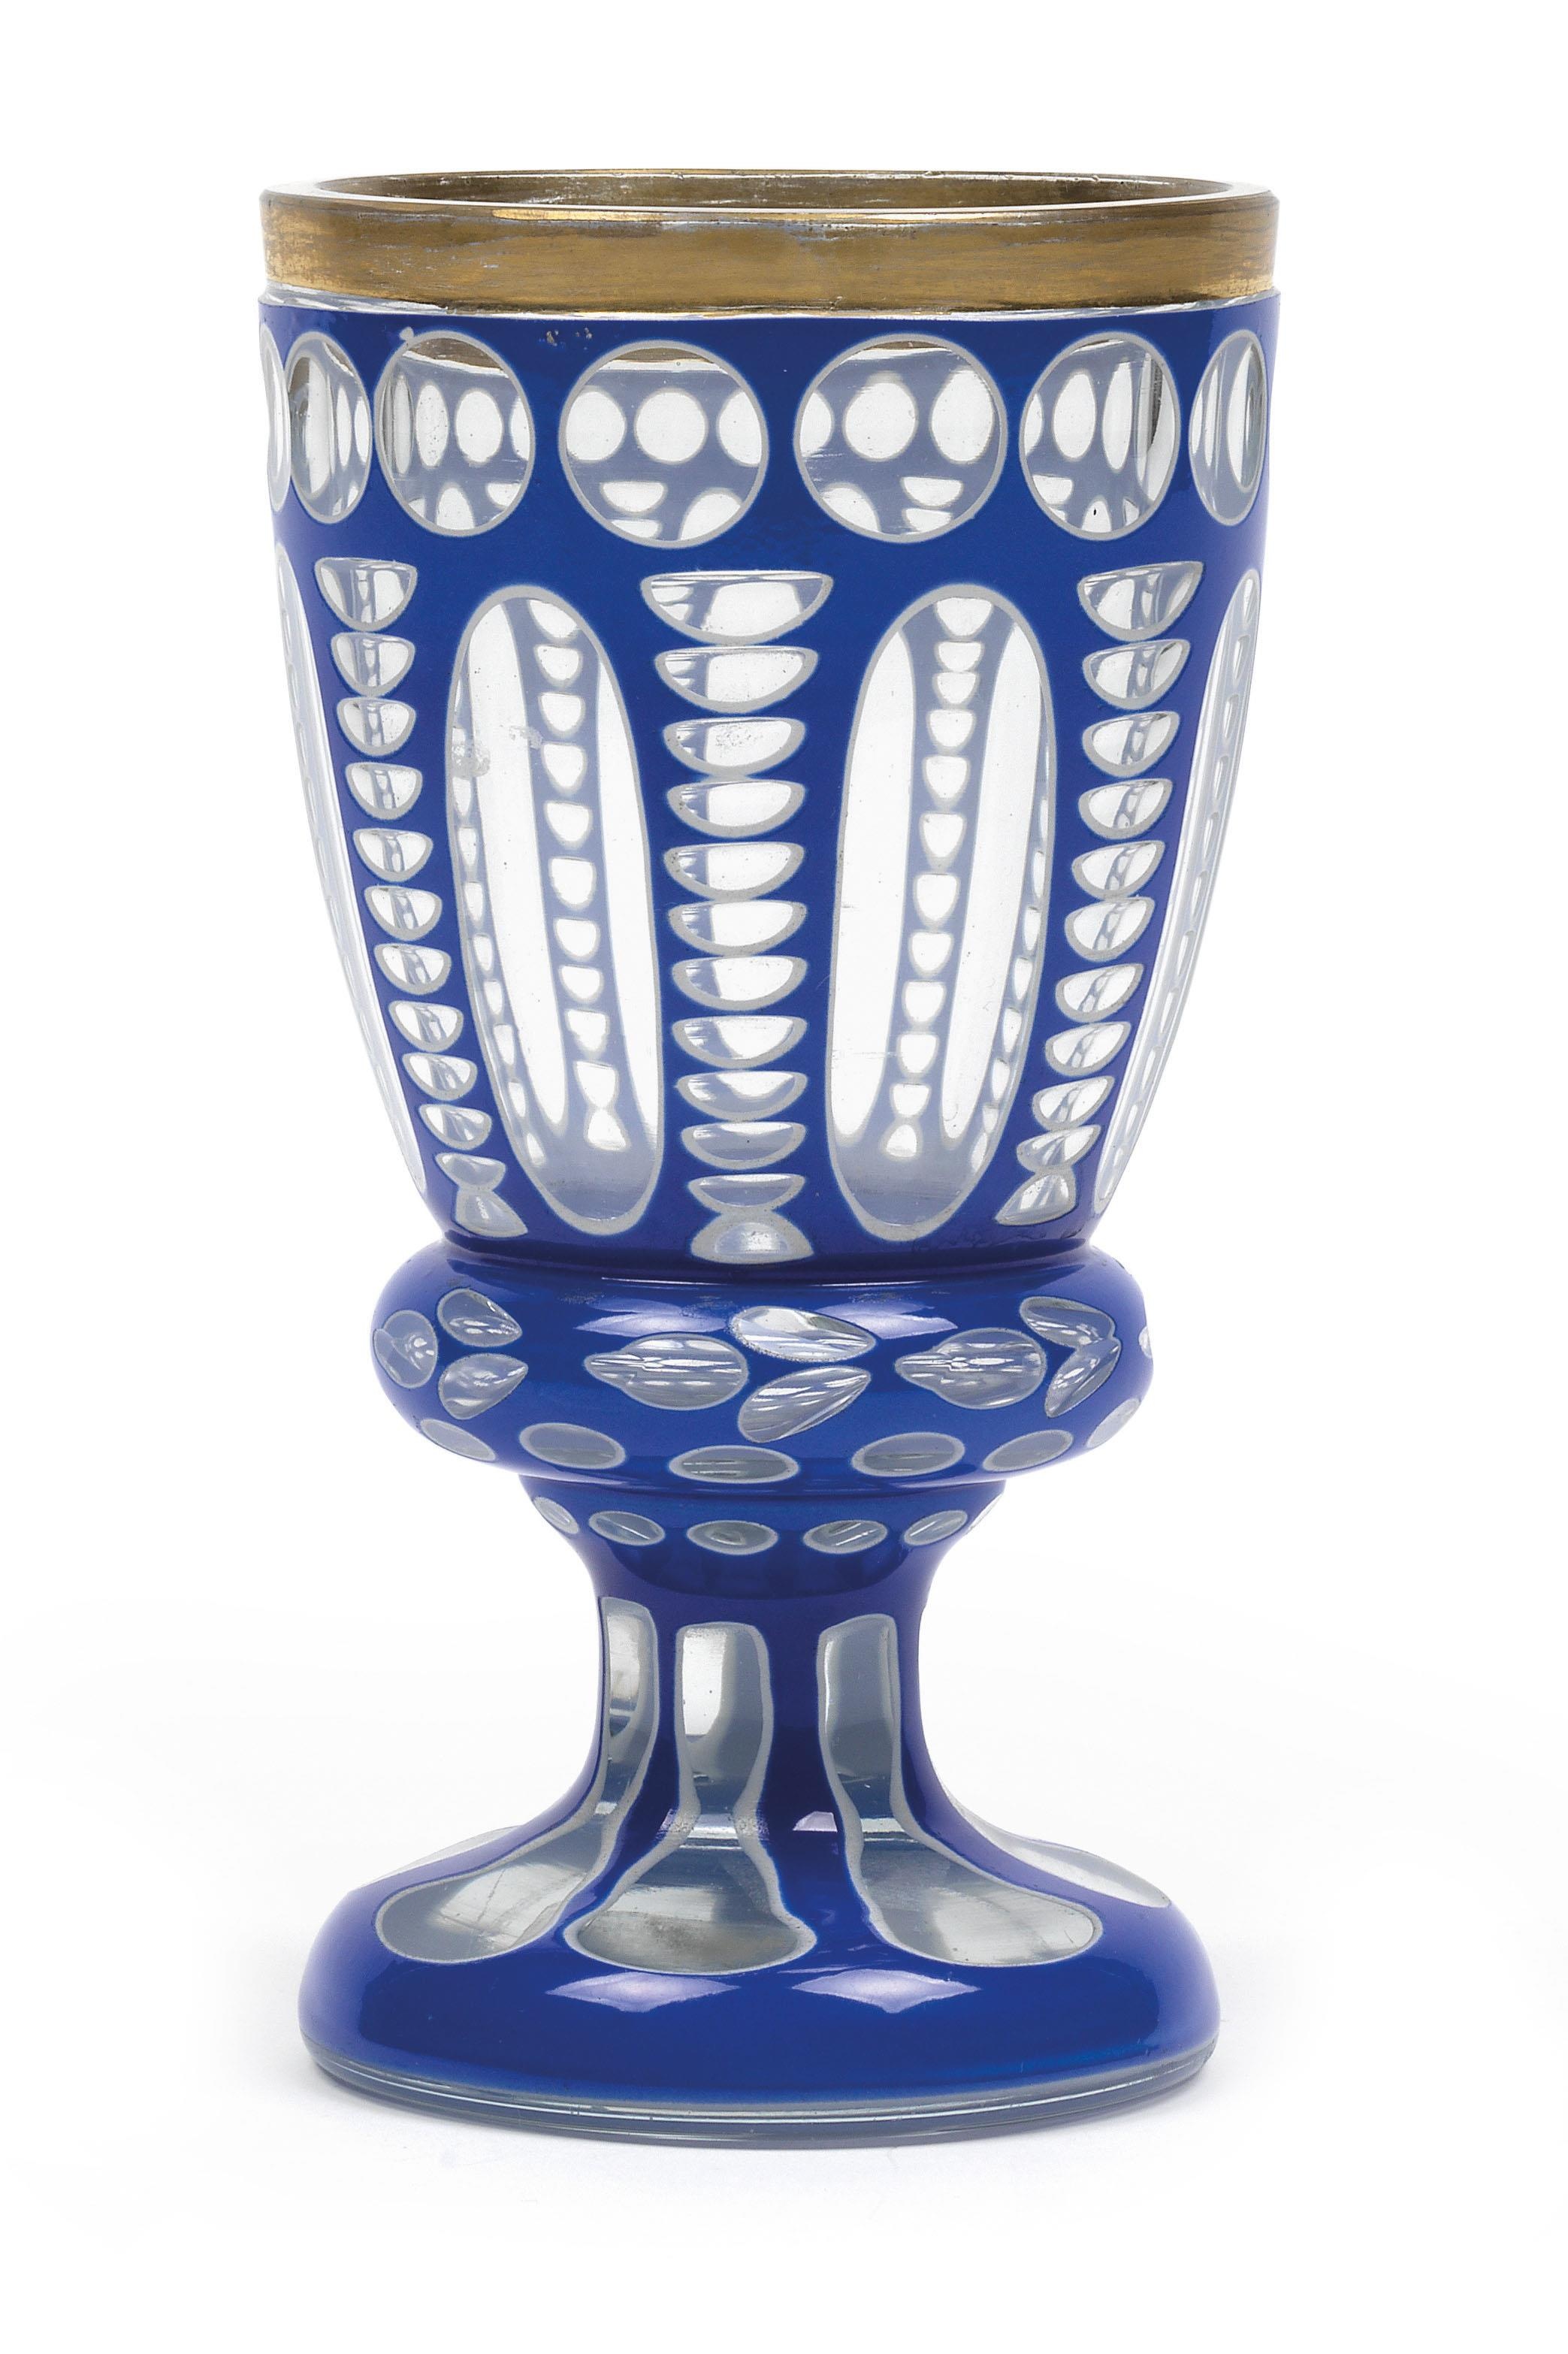 Goblet glass and porcelain, Realized price, Dorotheum auction, 2090x3140 HD Handy